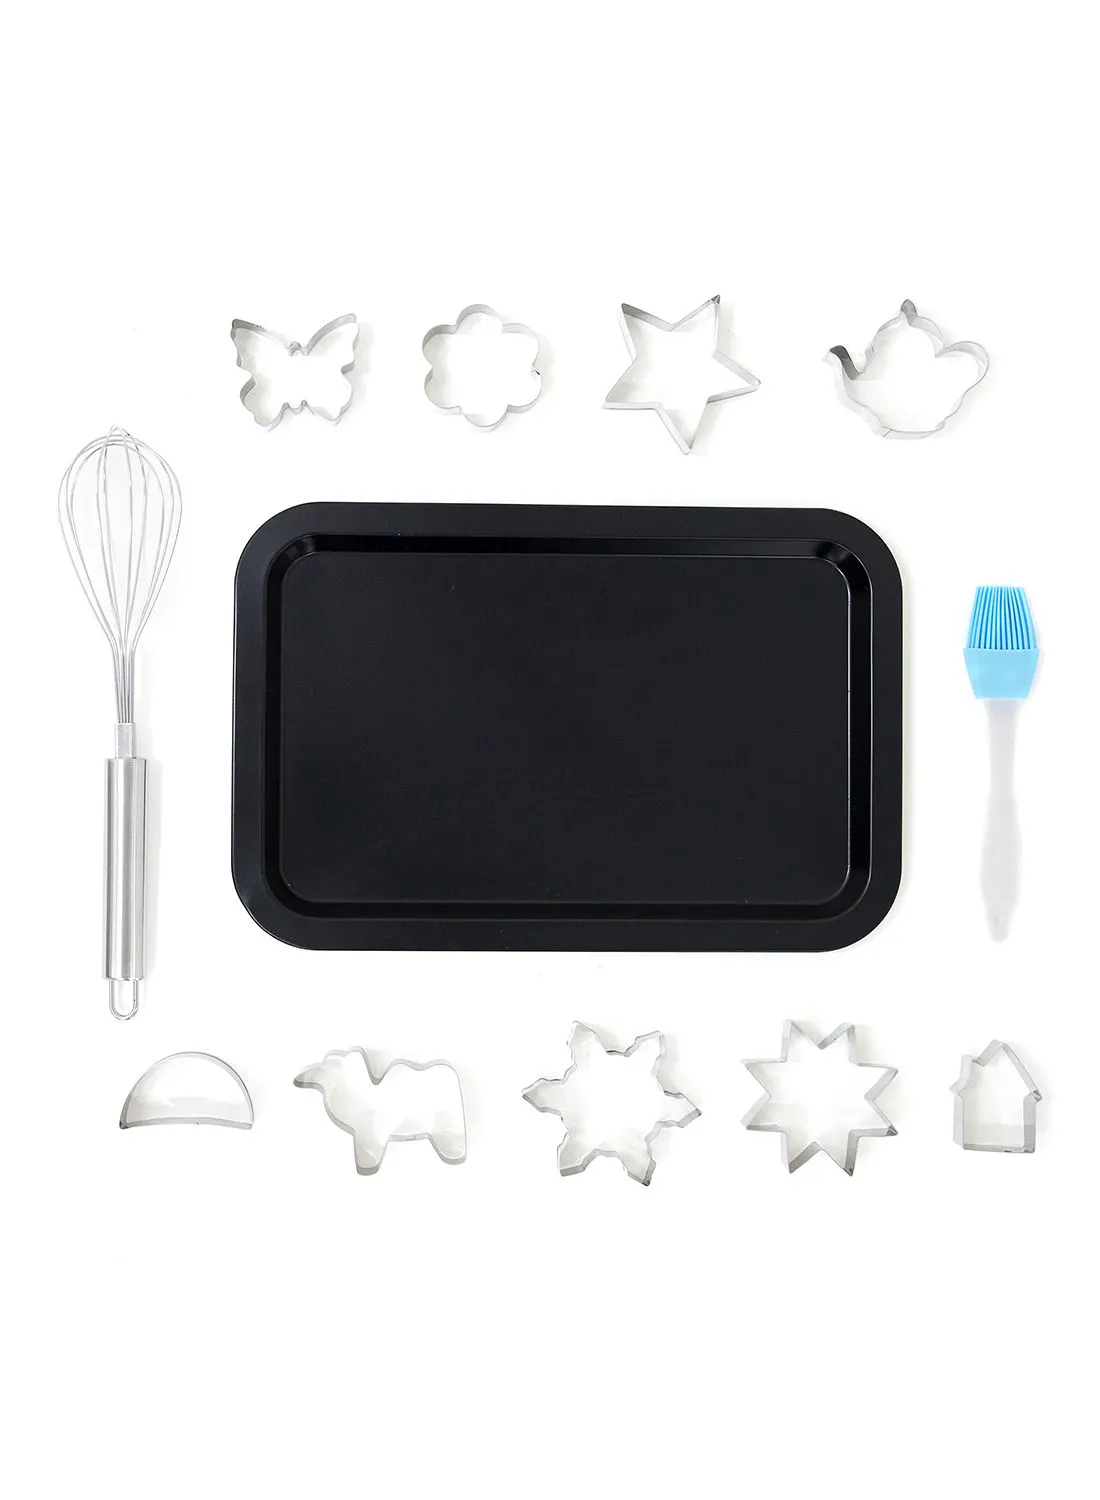 noon east 12 Piece Oven Pan Set - Made Of Carbon Steel - Arabic Shapes - Baking Pan - Oven Trays - Cake Tray - Oven Pan - Black